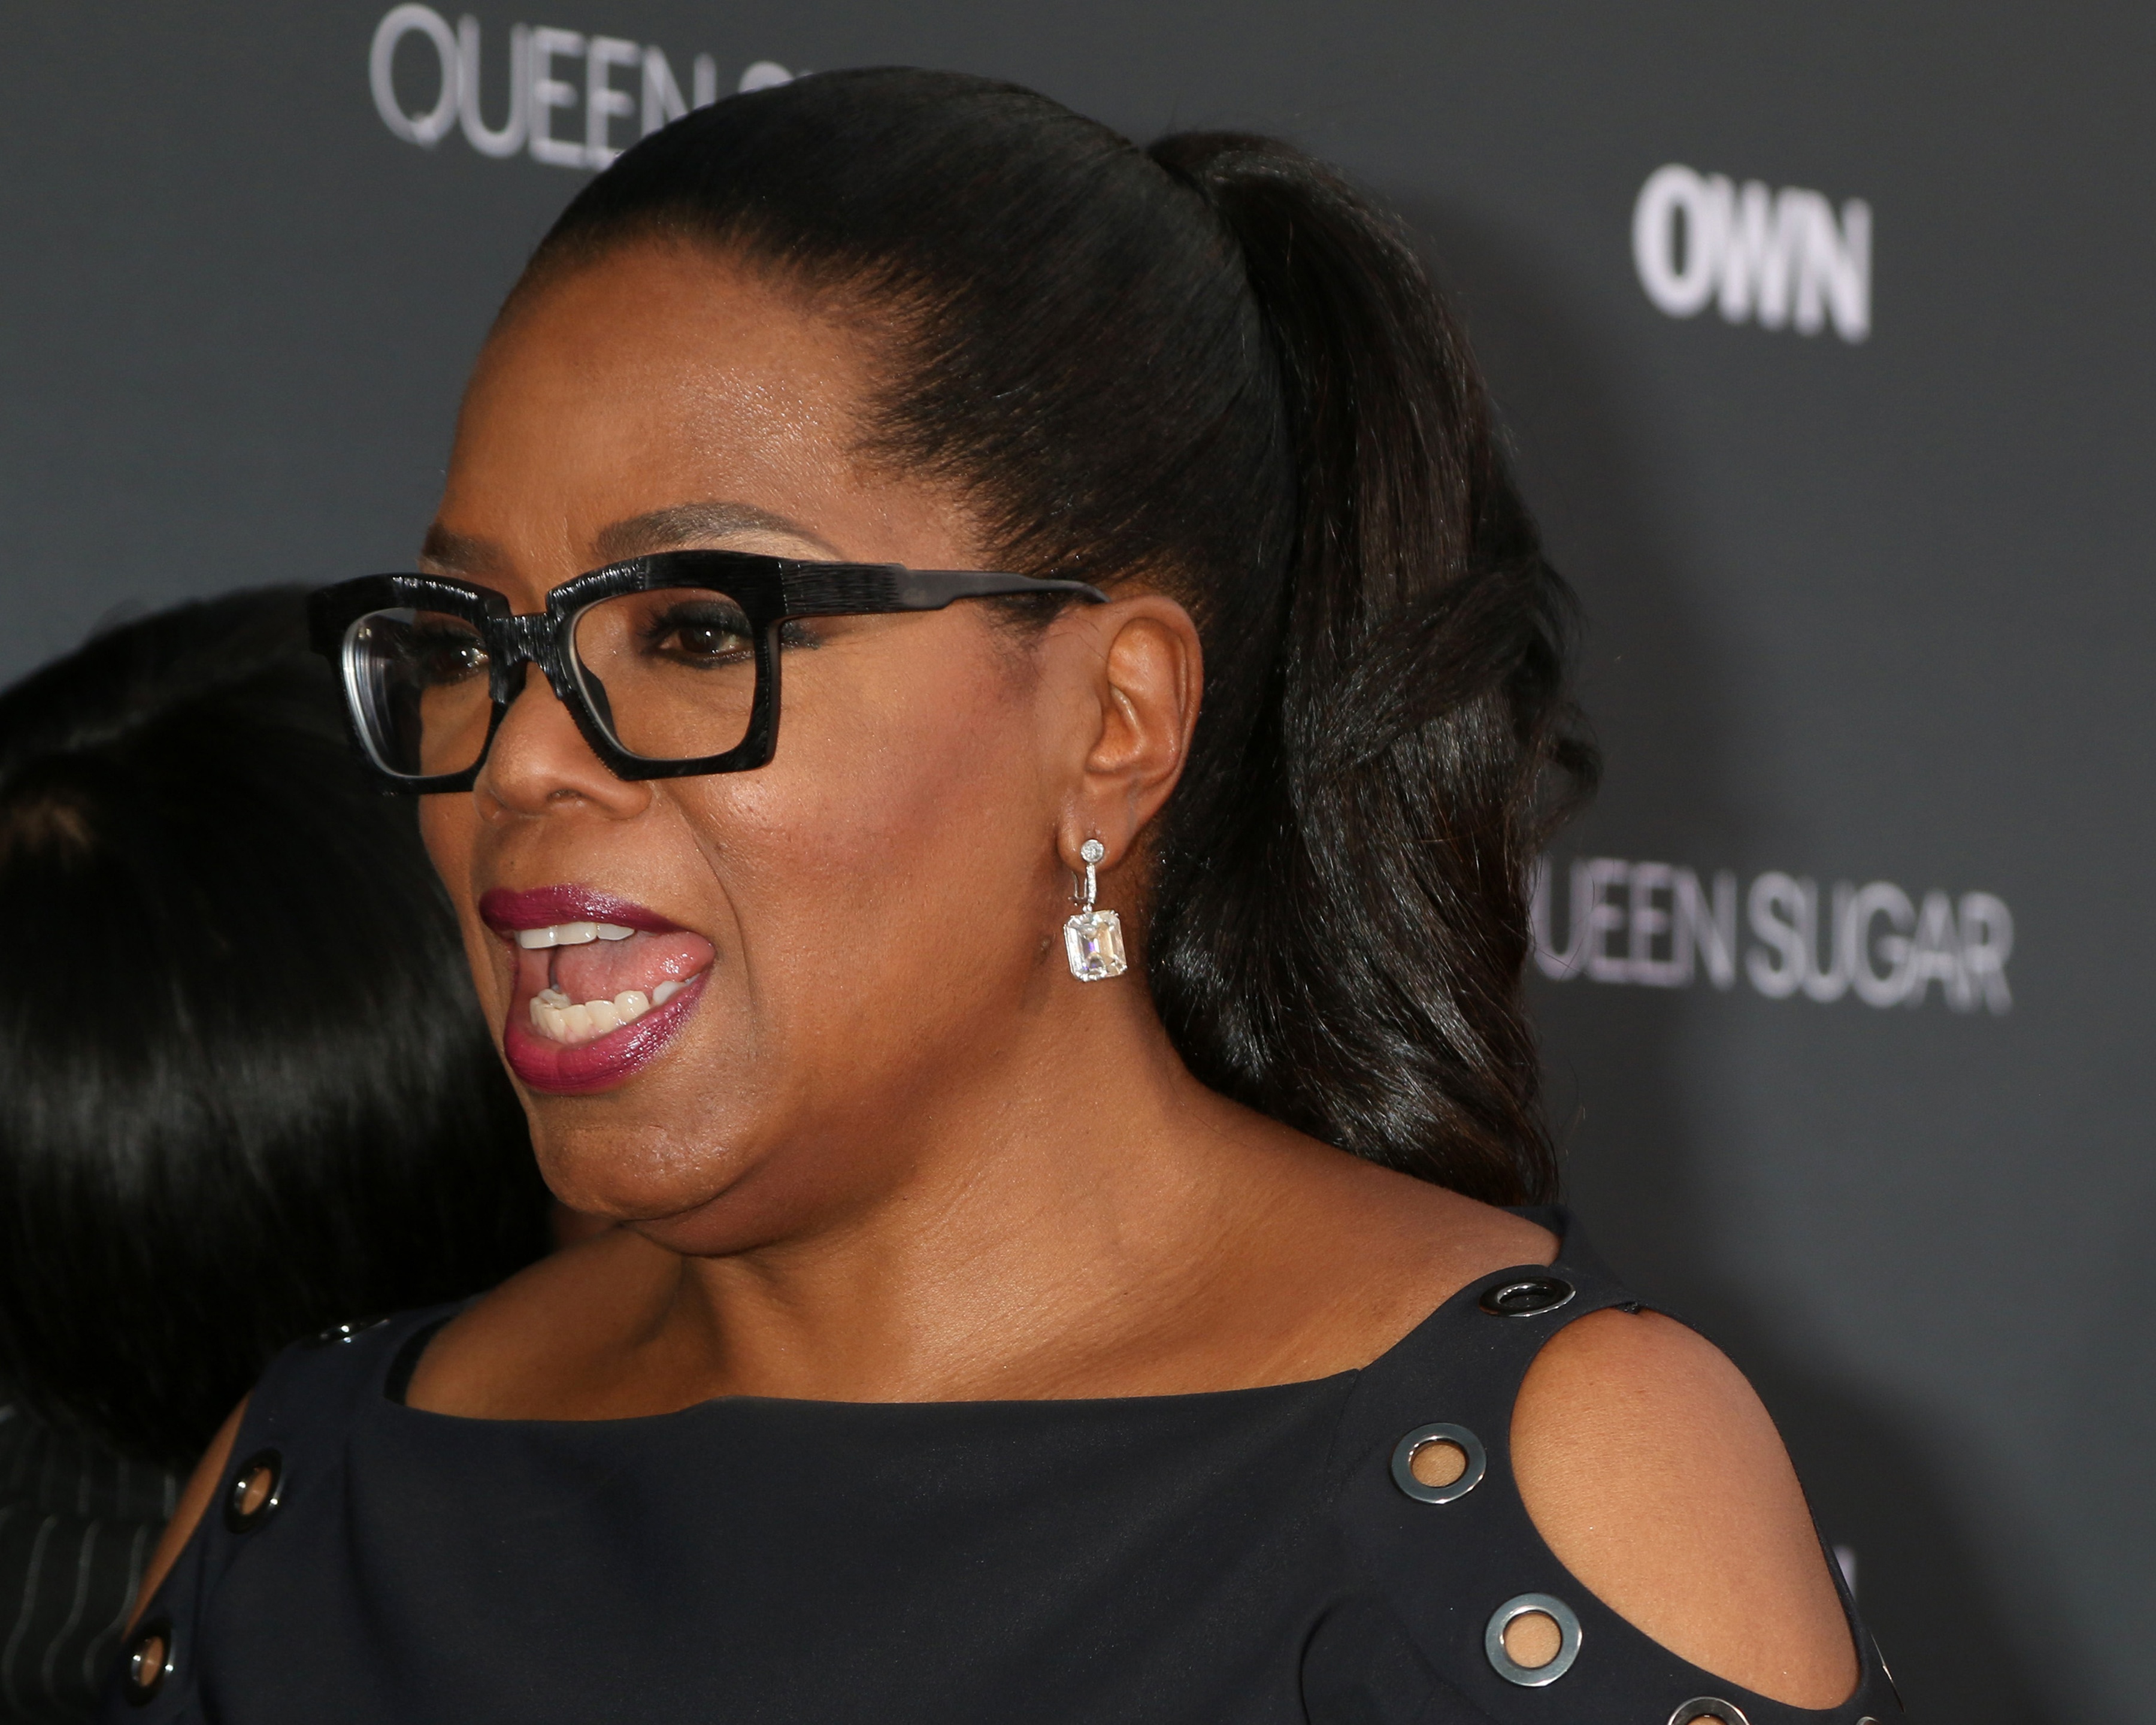 Oprah, True Food Kitchen, and the 2018 Food Service Industry Report